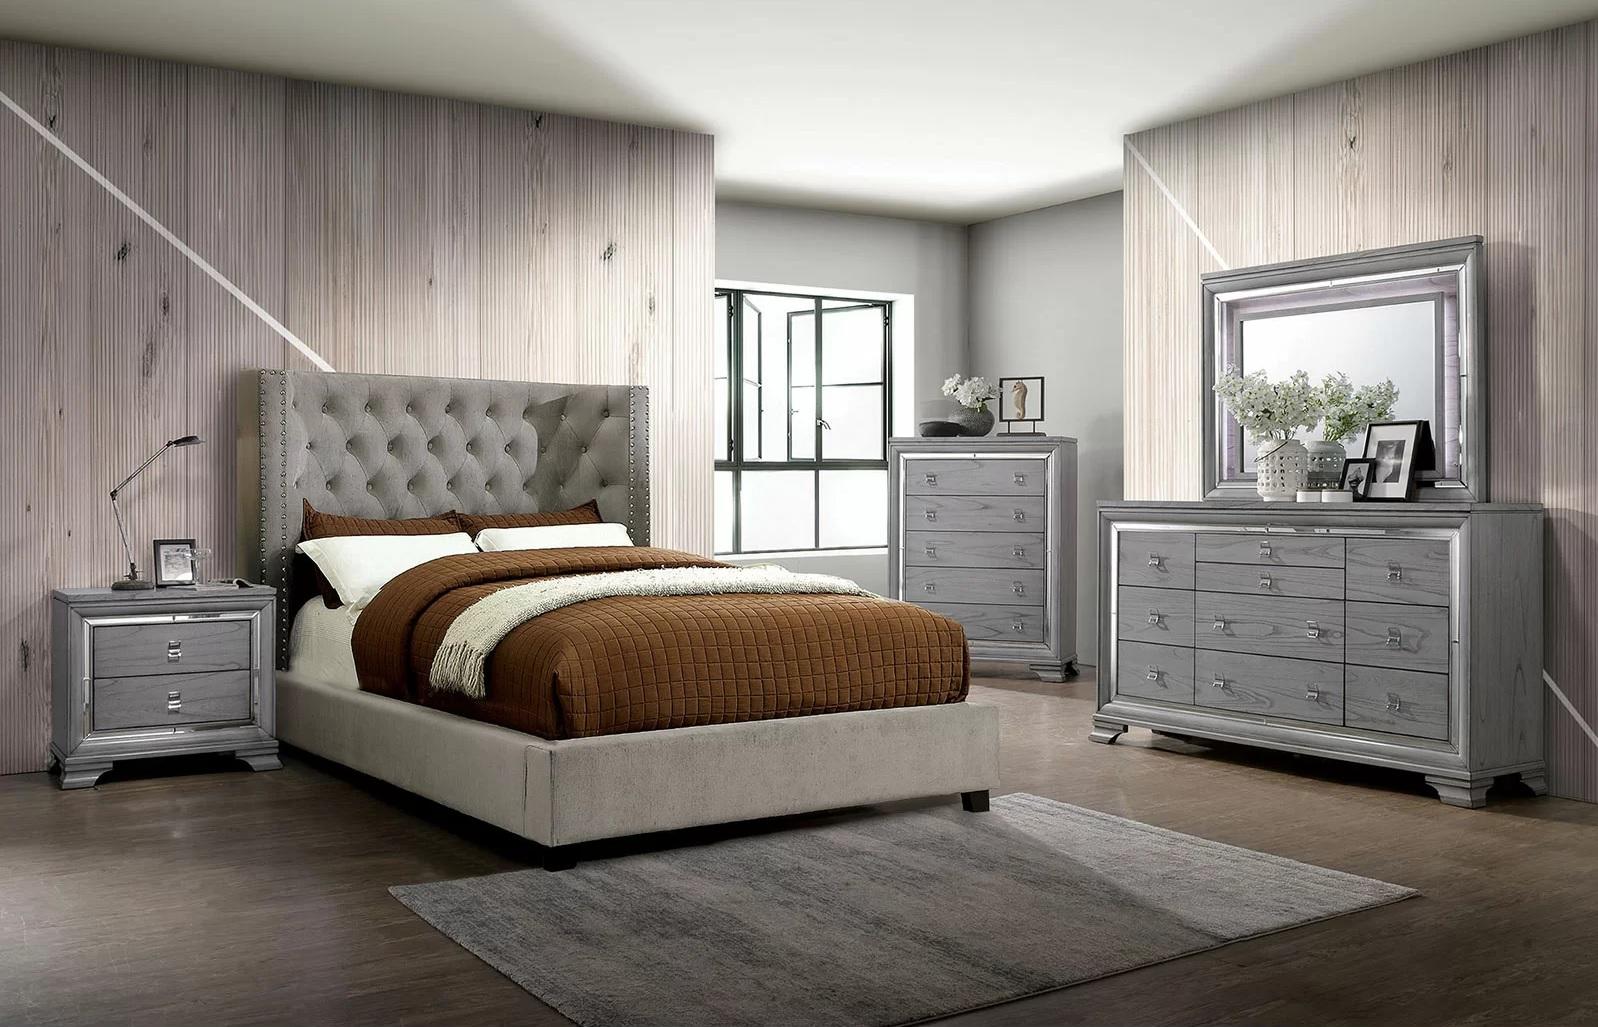 Transitional Platform Bedroom Set CM7779GY-Q-5PC Cayla & Alanis CM7779GY-Q-5PC in Gray 